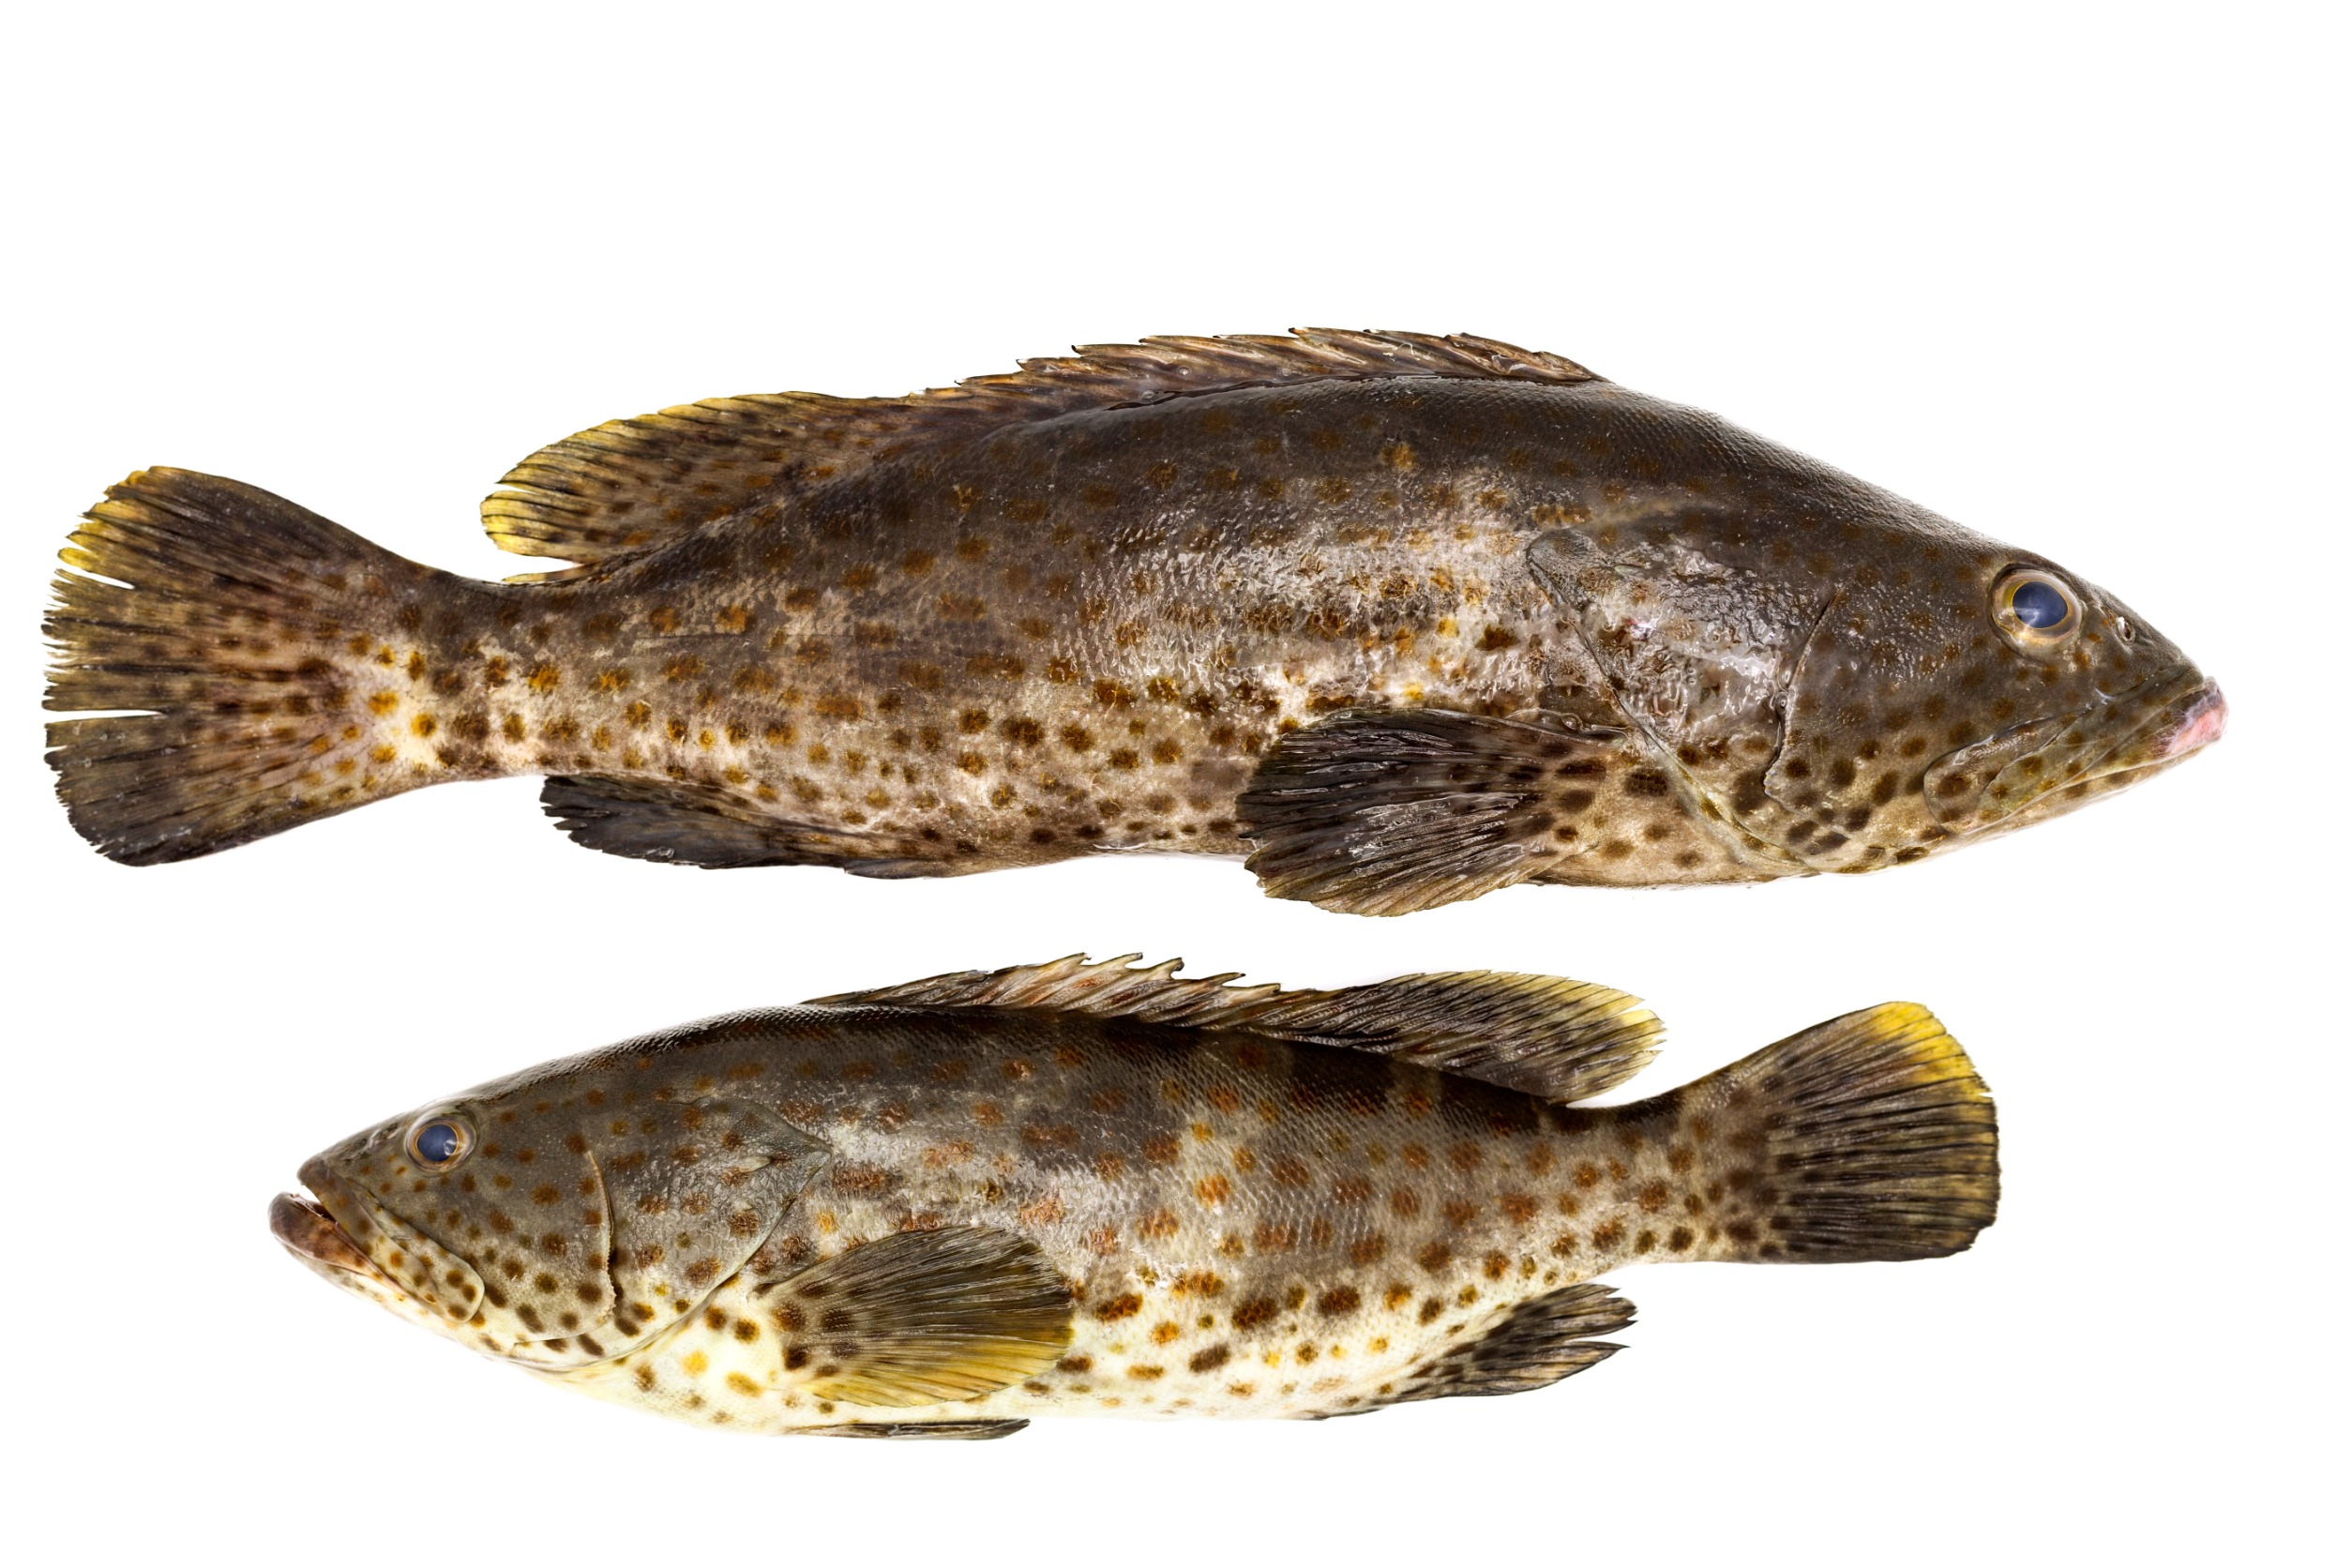 Two groupers on white background